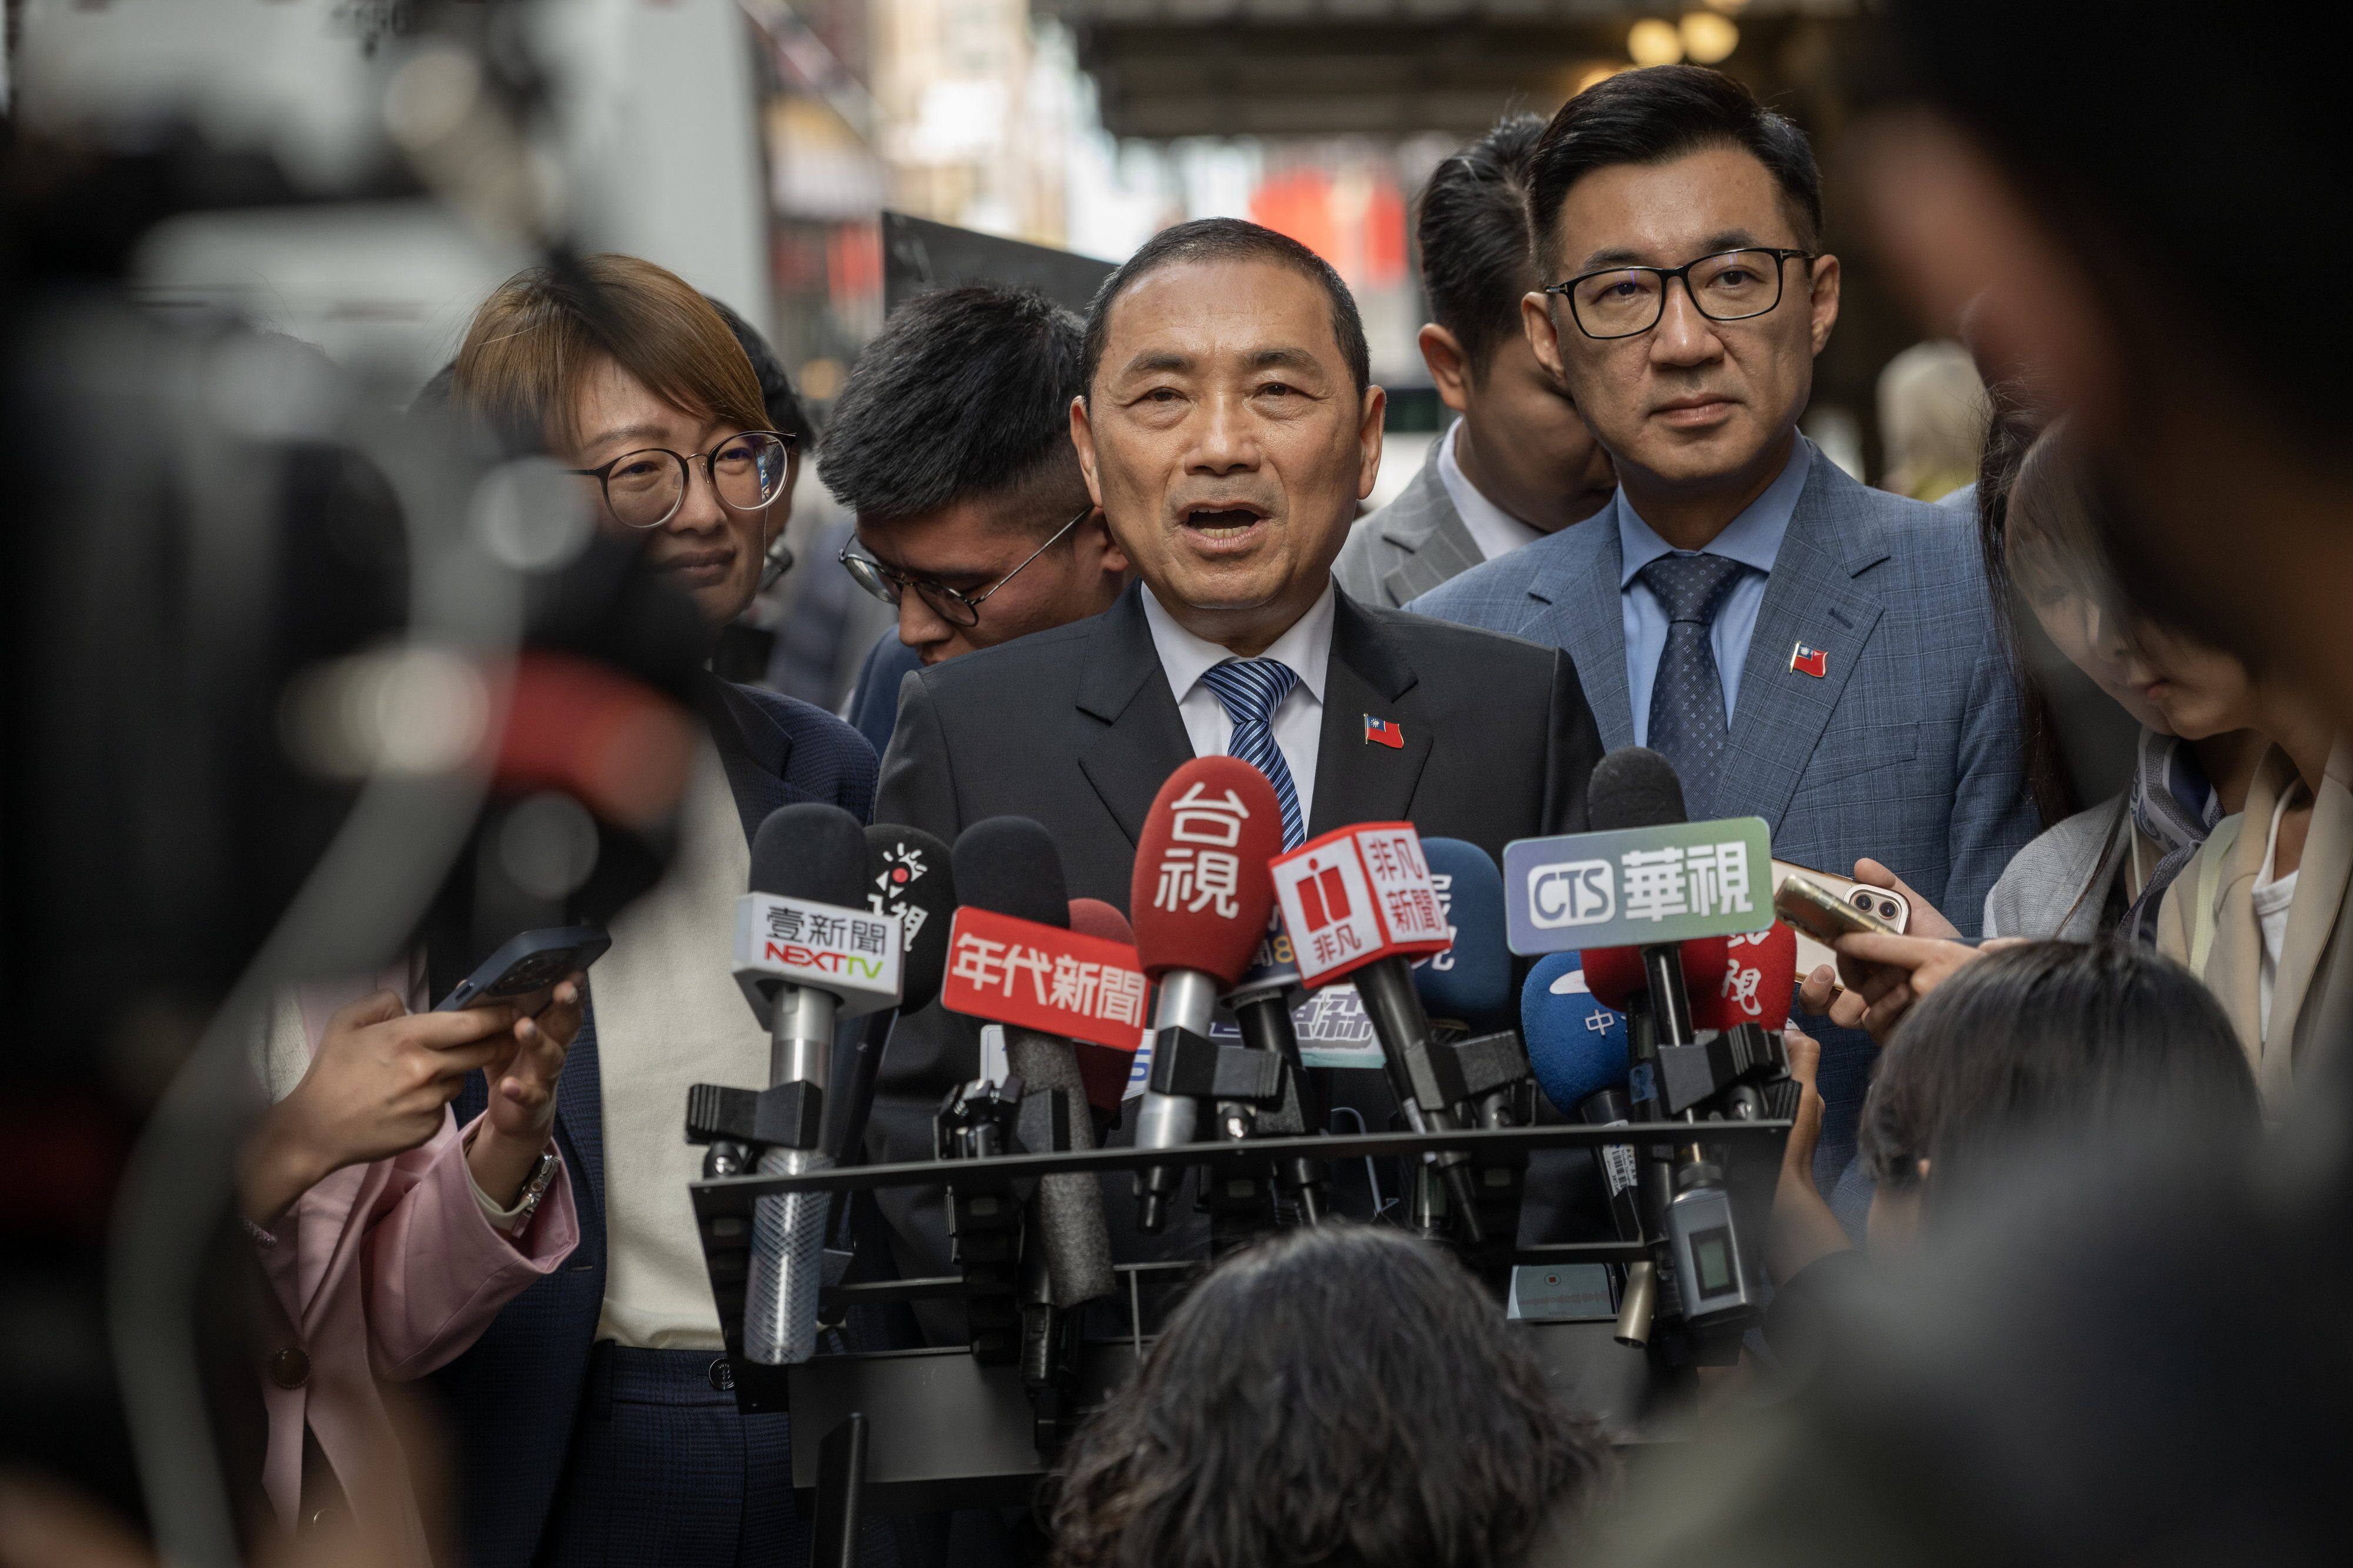 KMT presidential candidate Hou Yu-ih says dialogue and deterrence are needed  to ease tensions in the Taiwan Strait. Photo: Bloomberg